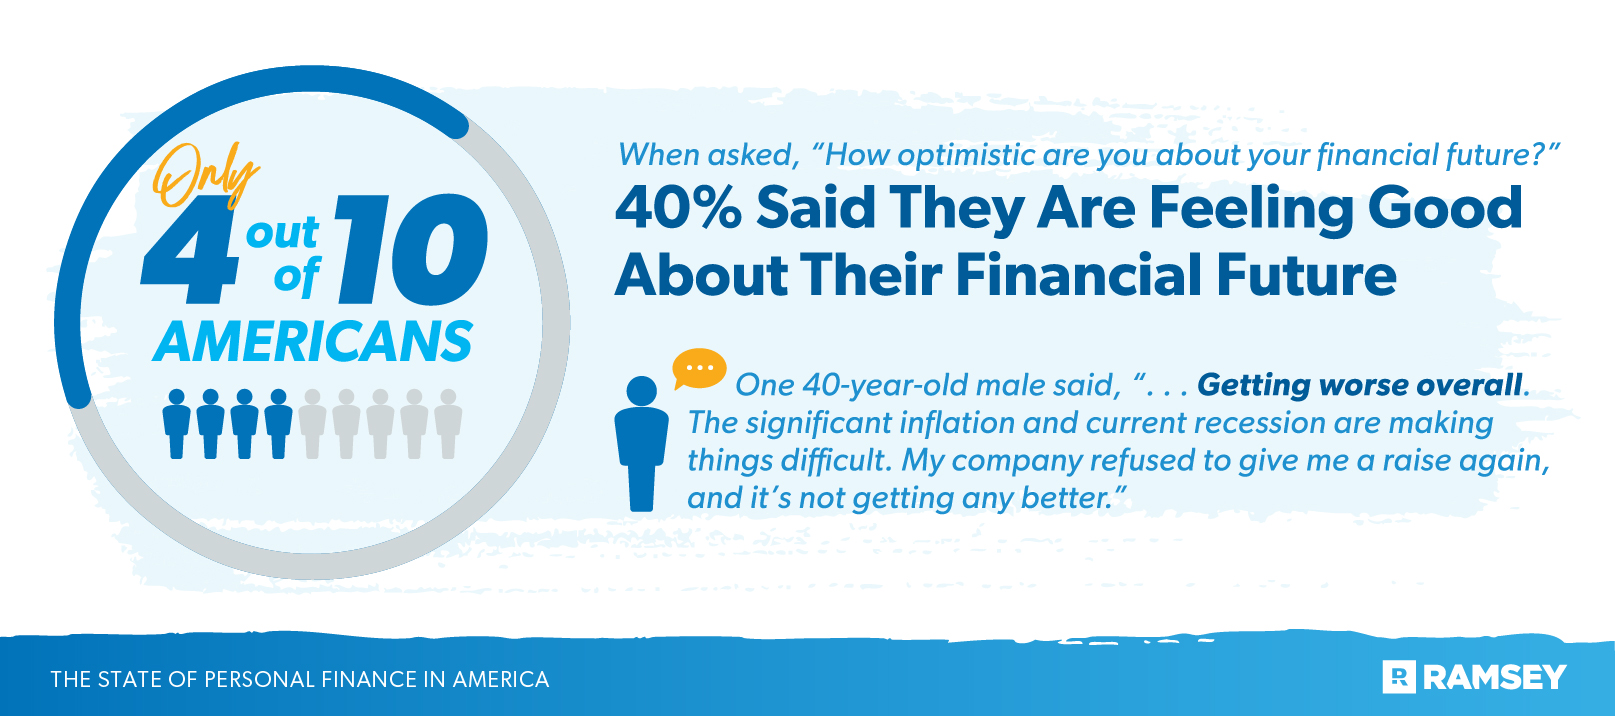 40% of people said they are feeling good about their financial future